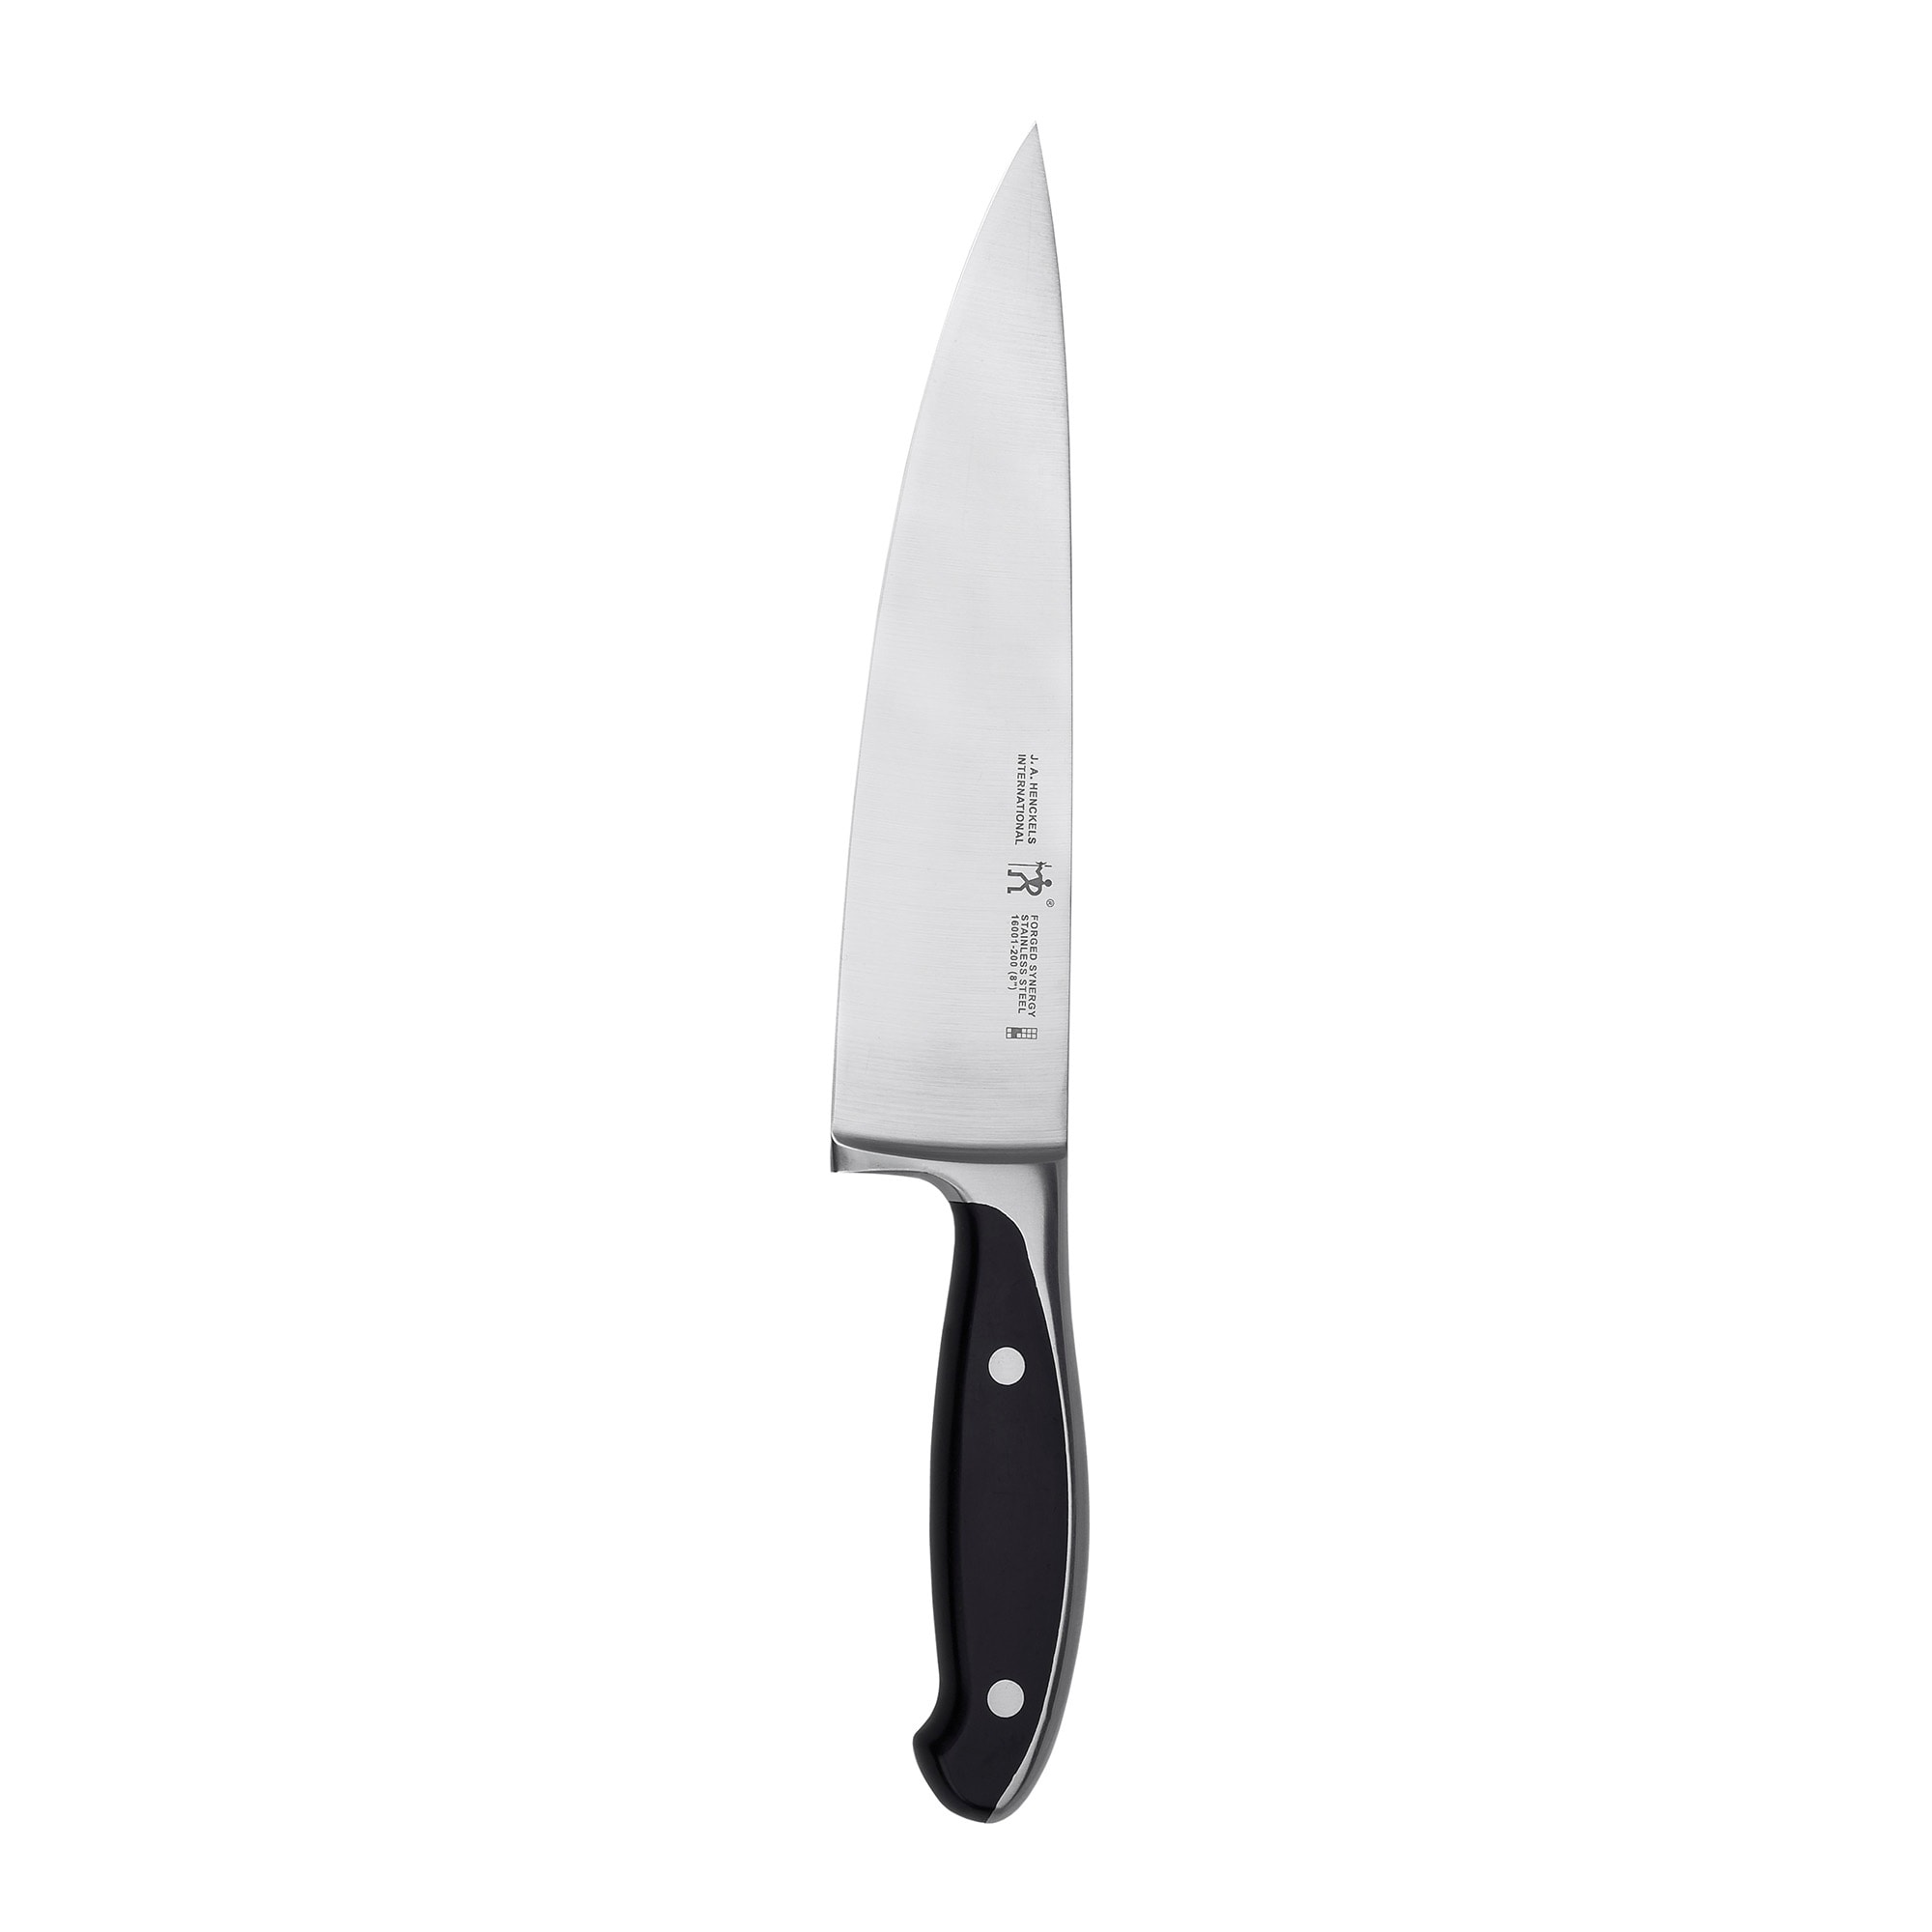 Buy Henckels Forged Synergy Paring knife